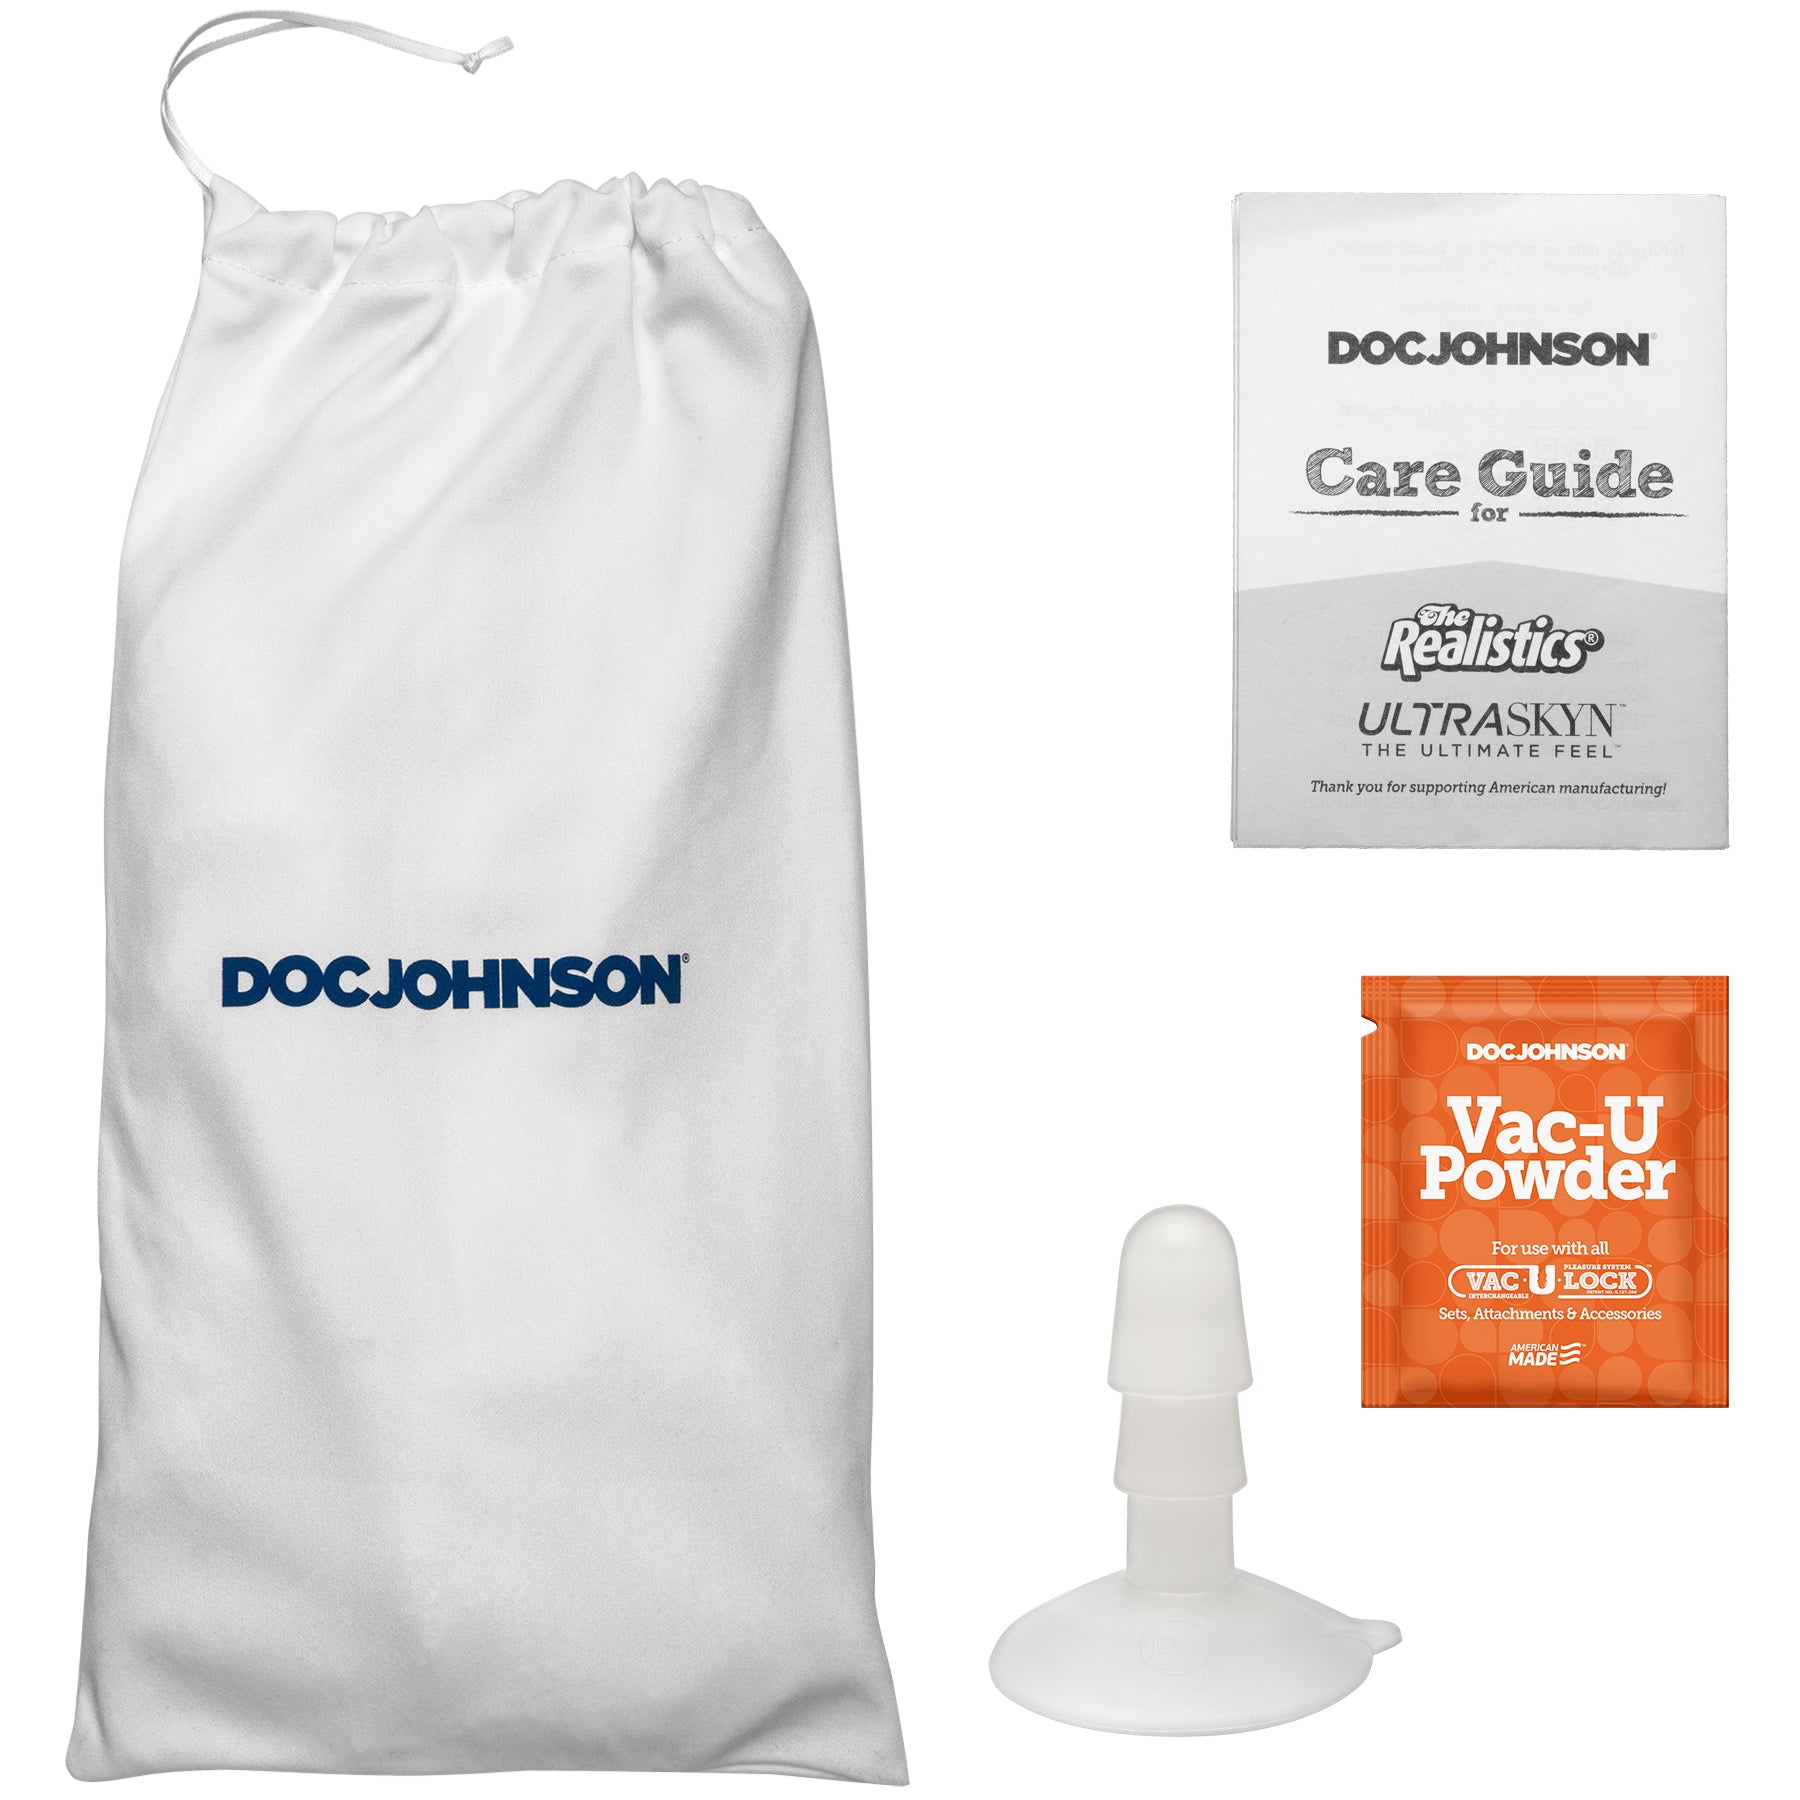 Signature Cocks - Quinton James - 9.5 Inch  Ultraskyn Cock With Removable Vac-U-Lock  Suction Cup-1